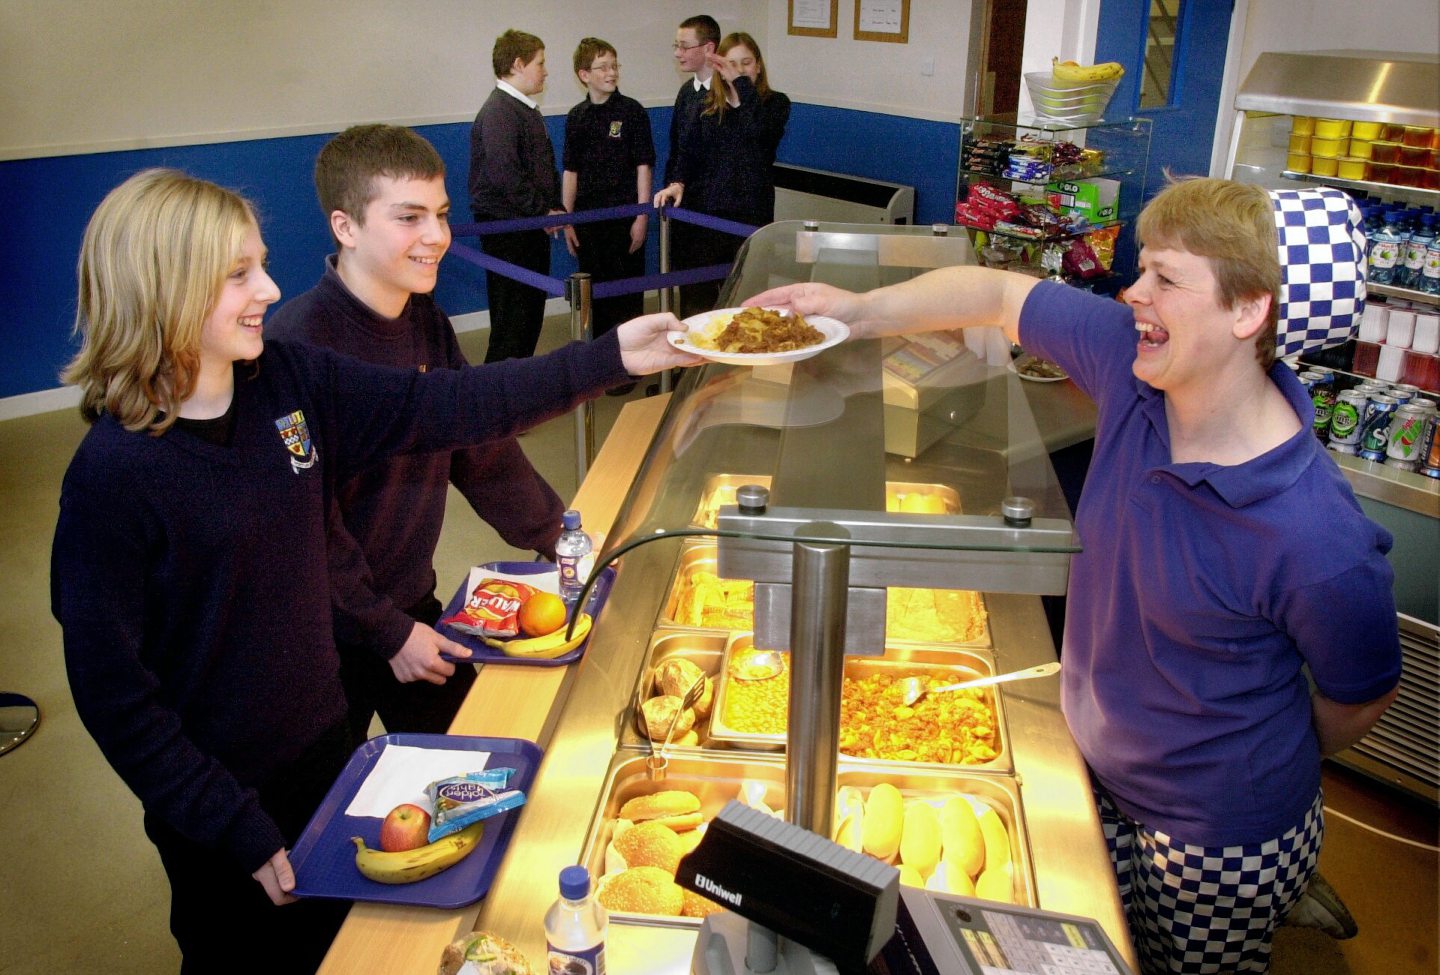 Pupils being handed a plate of food by the dinner lady